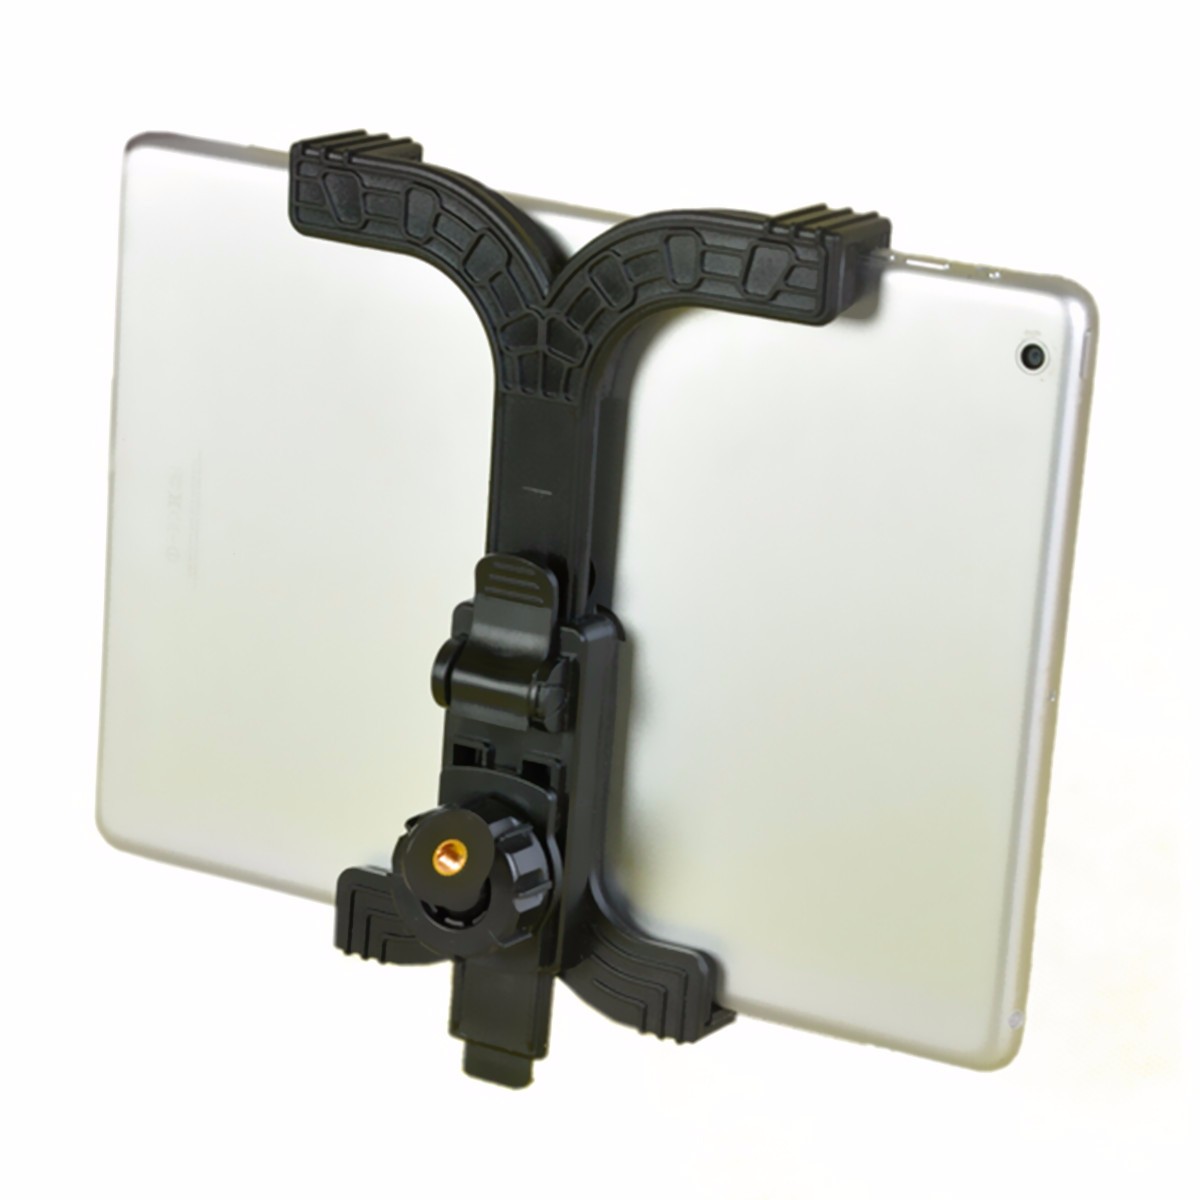 

Self Stick Tripod Stand Holder Tablet Bracket Accessories For 7 To 11 Inch iPad iPod Tablet